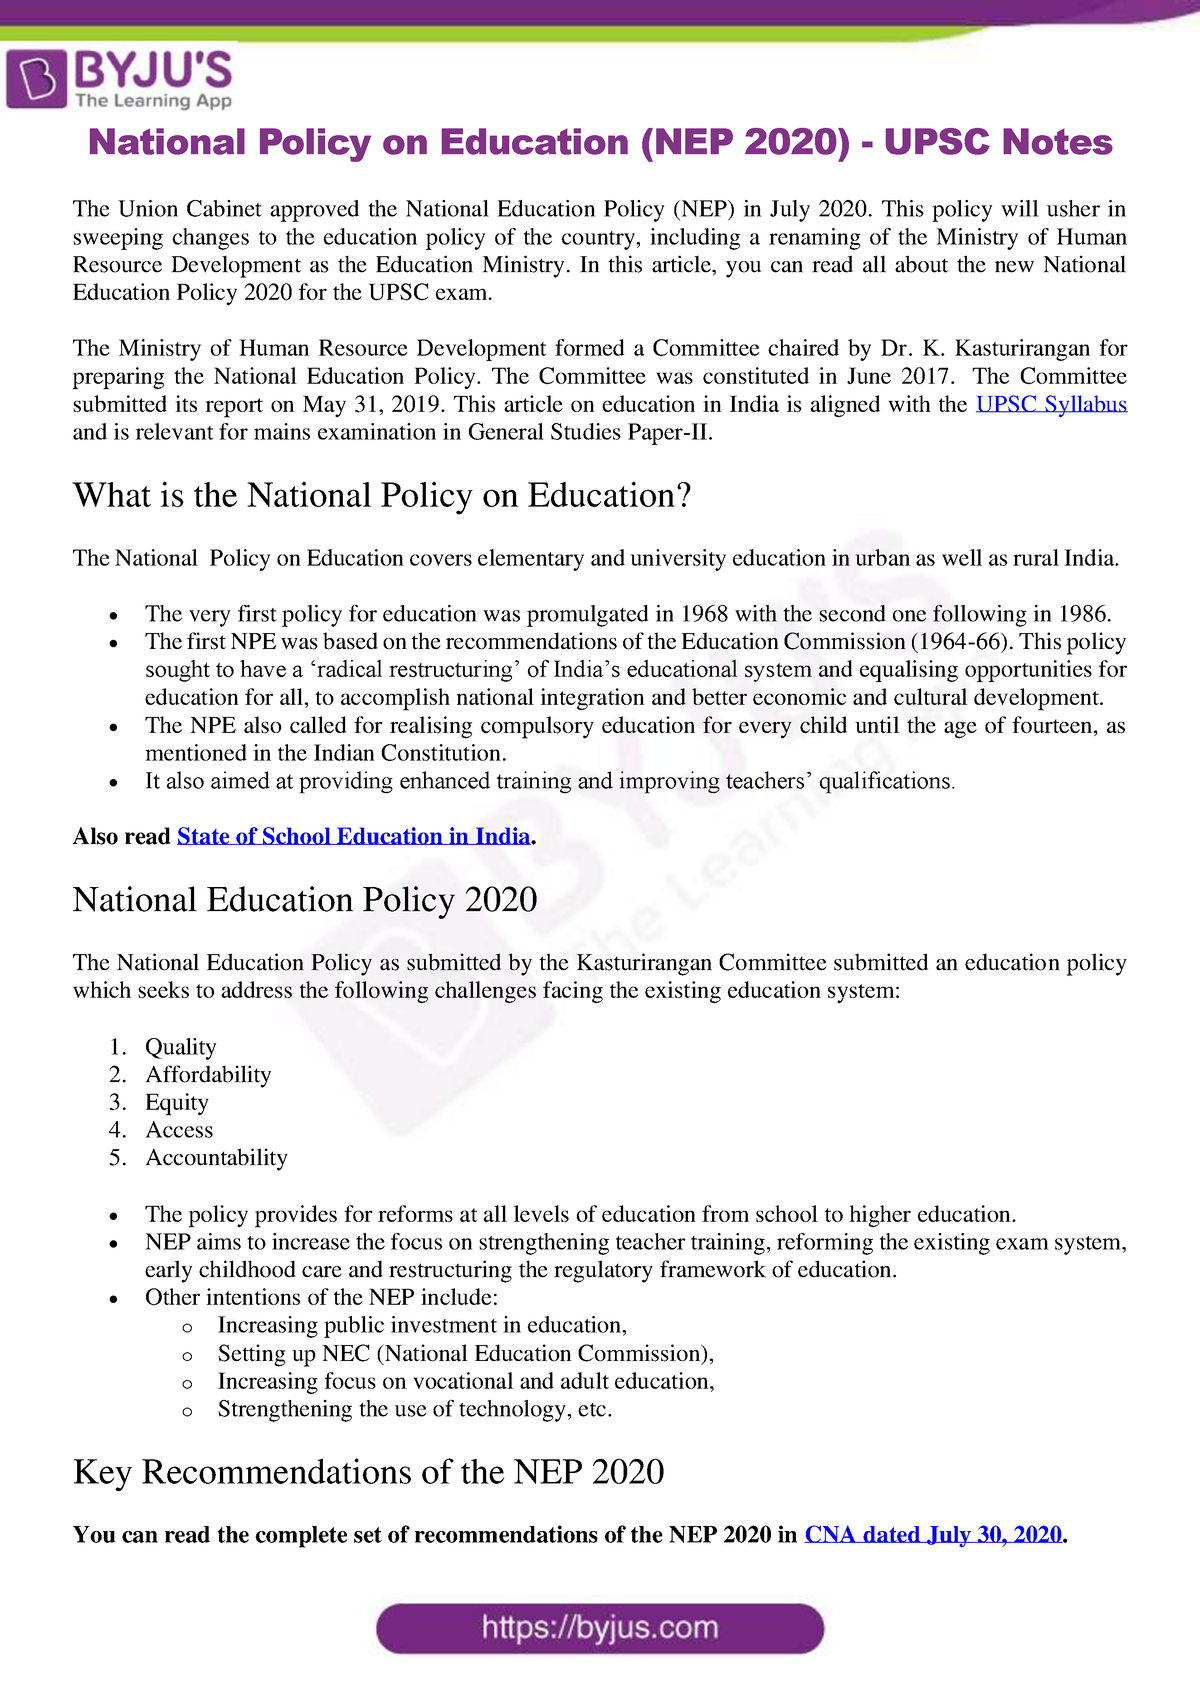 national education policy 2020 research paper